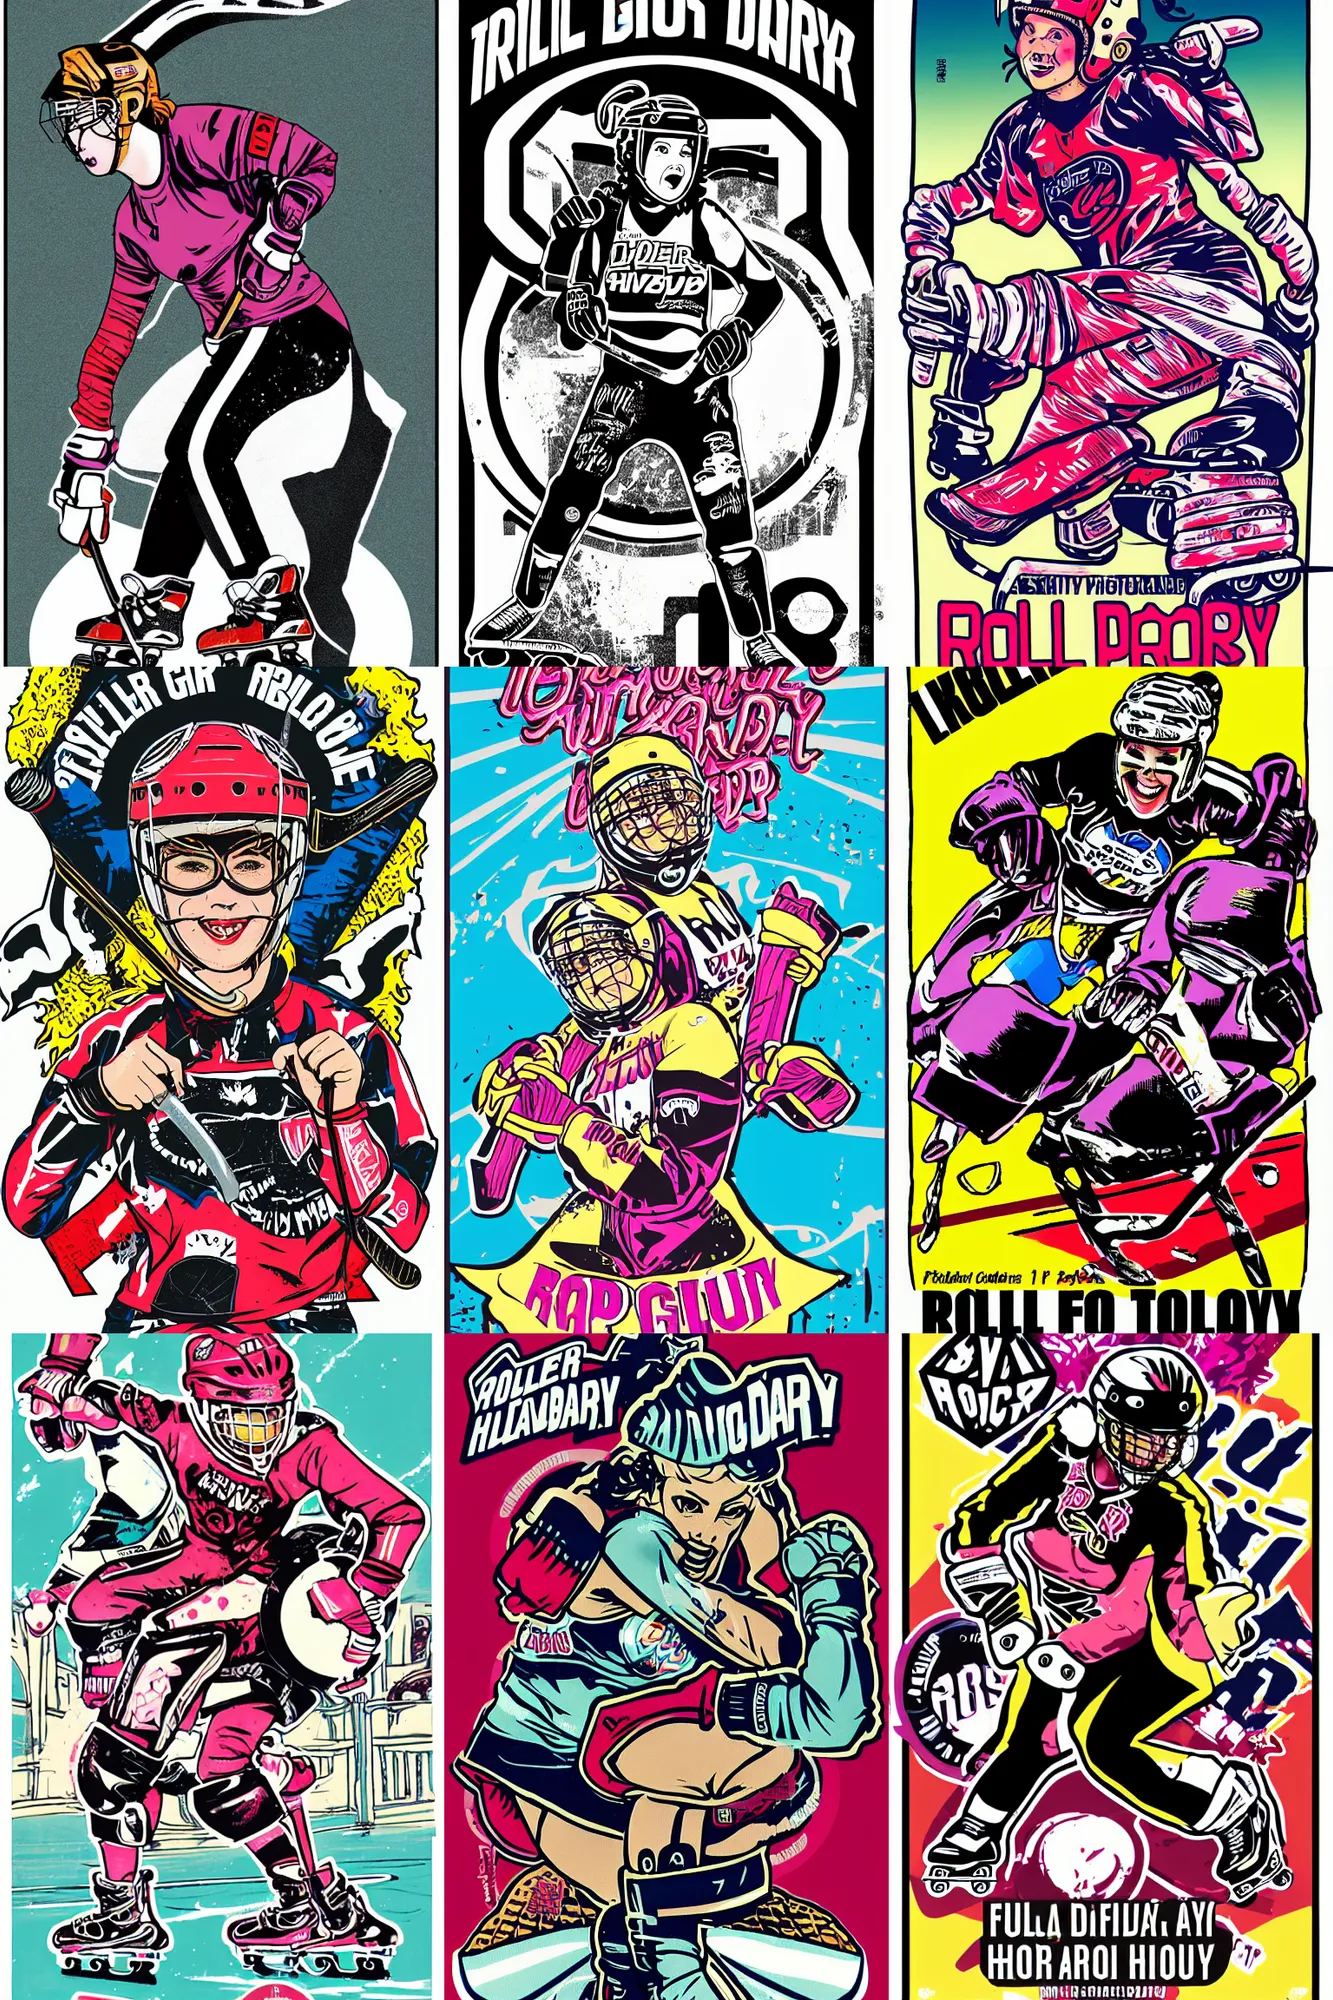 Prompt: roller derby girl hockey Stop , full length portrait, logo, wearing skating helmet, wearing torn clothes, victory lap, Philippe Caza, 2 colour print